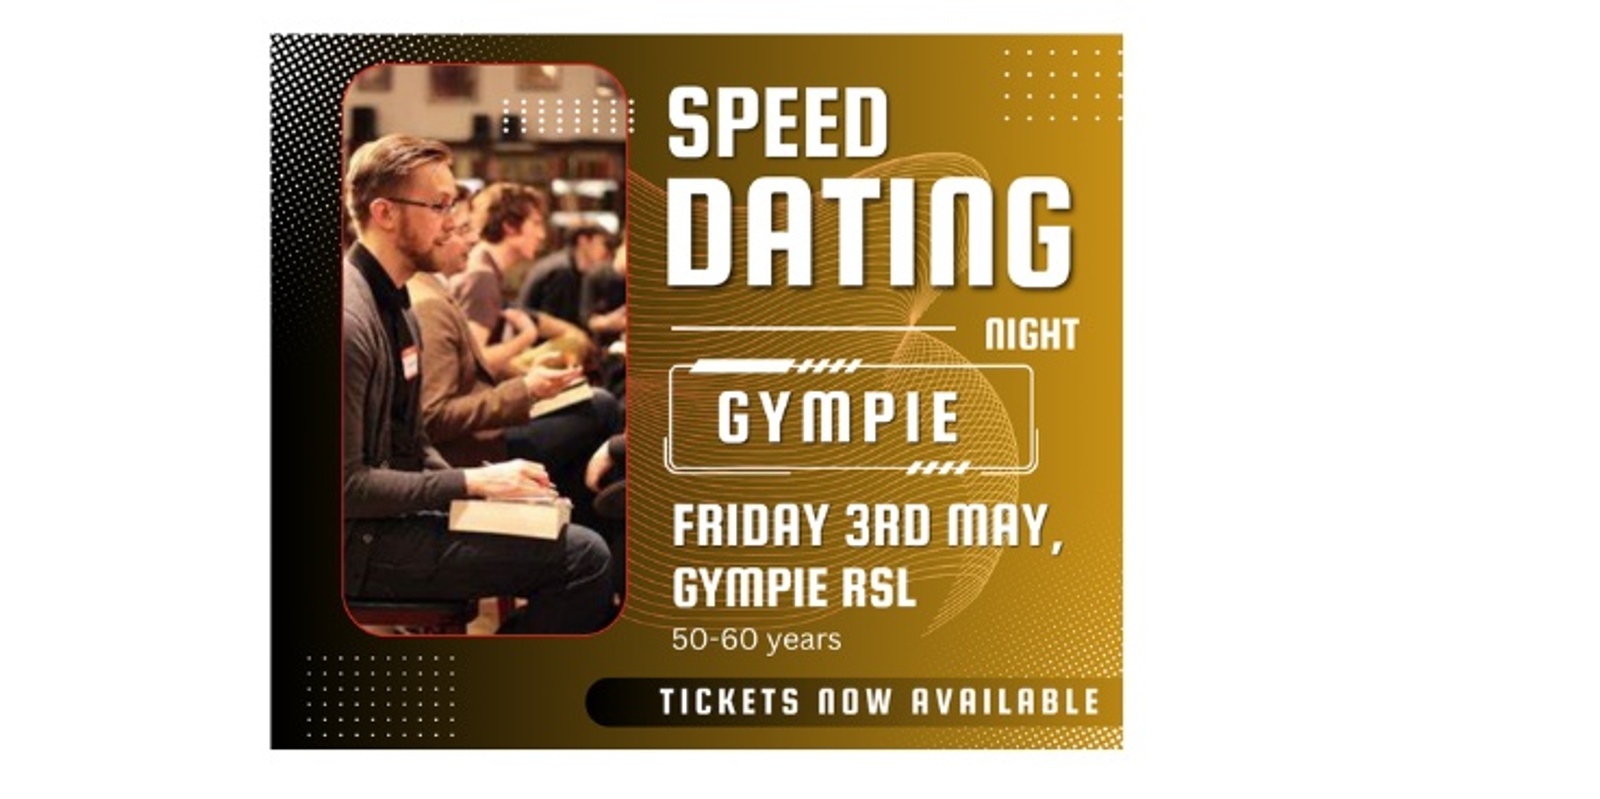 Banner image for Gympie Speed Dating Night